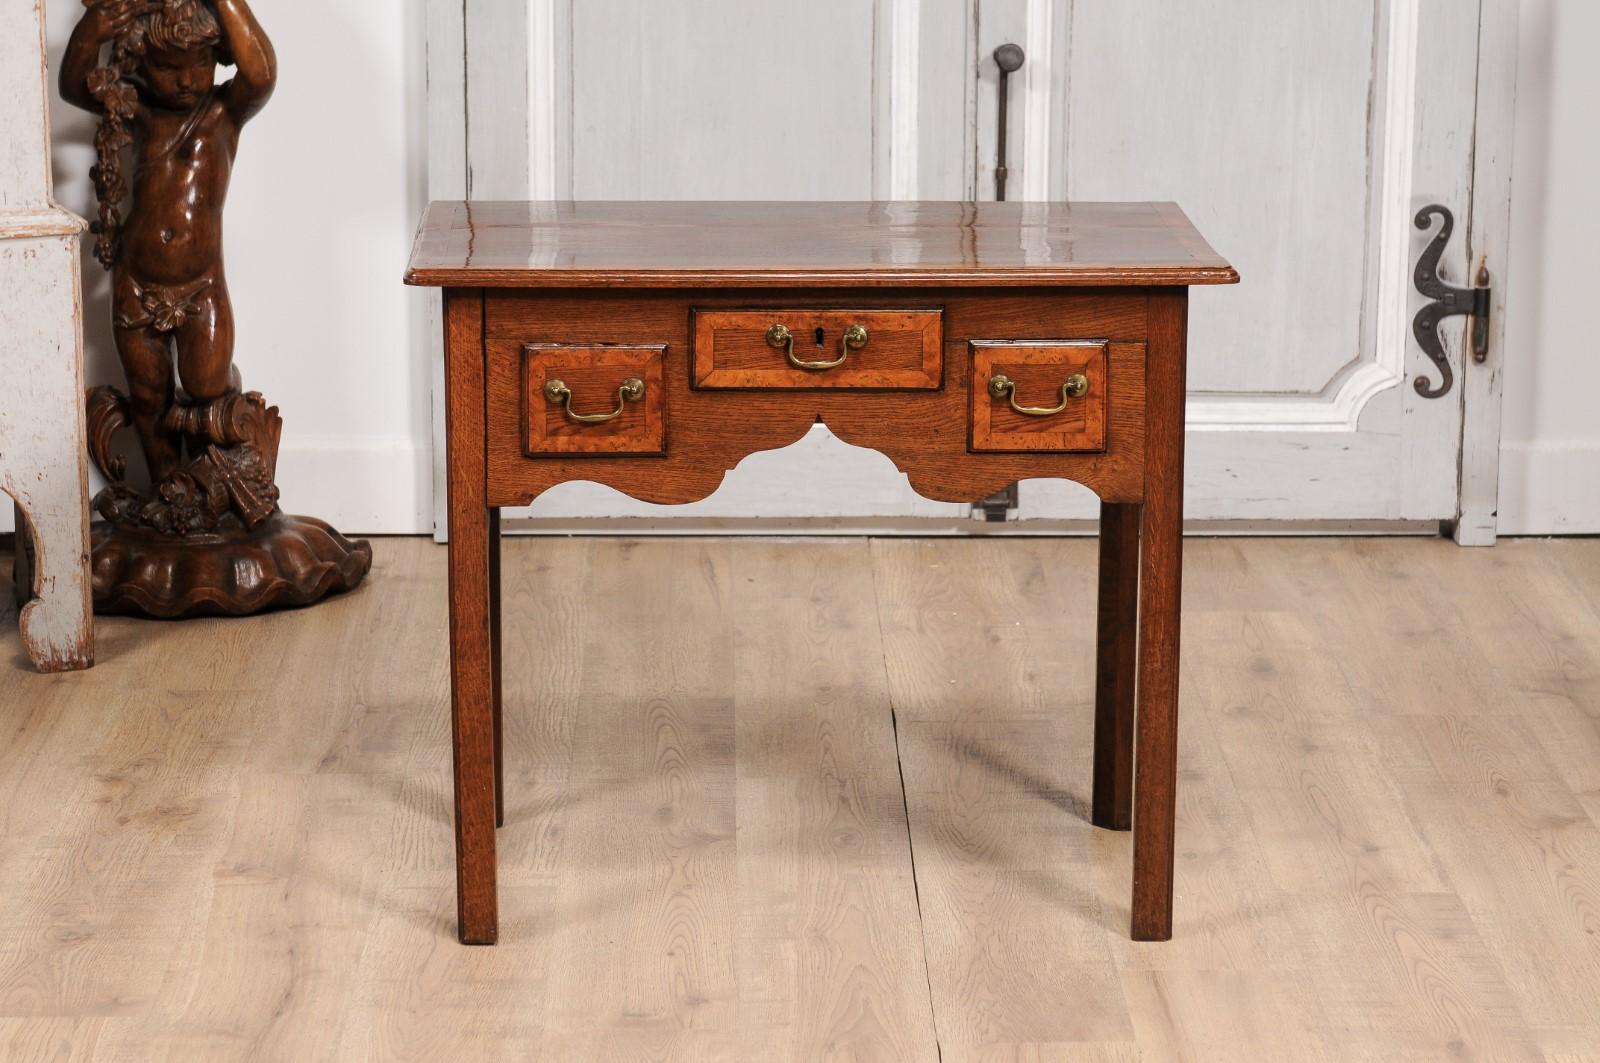 English Georgian Period 18th Century Oak Lowboy Side Table with Carved Apron For Sale 9